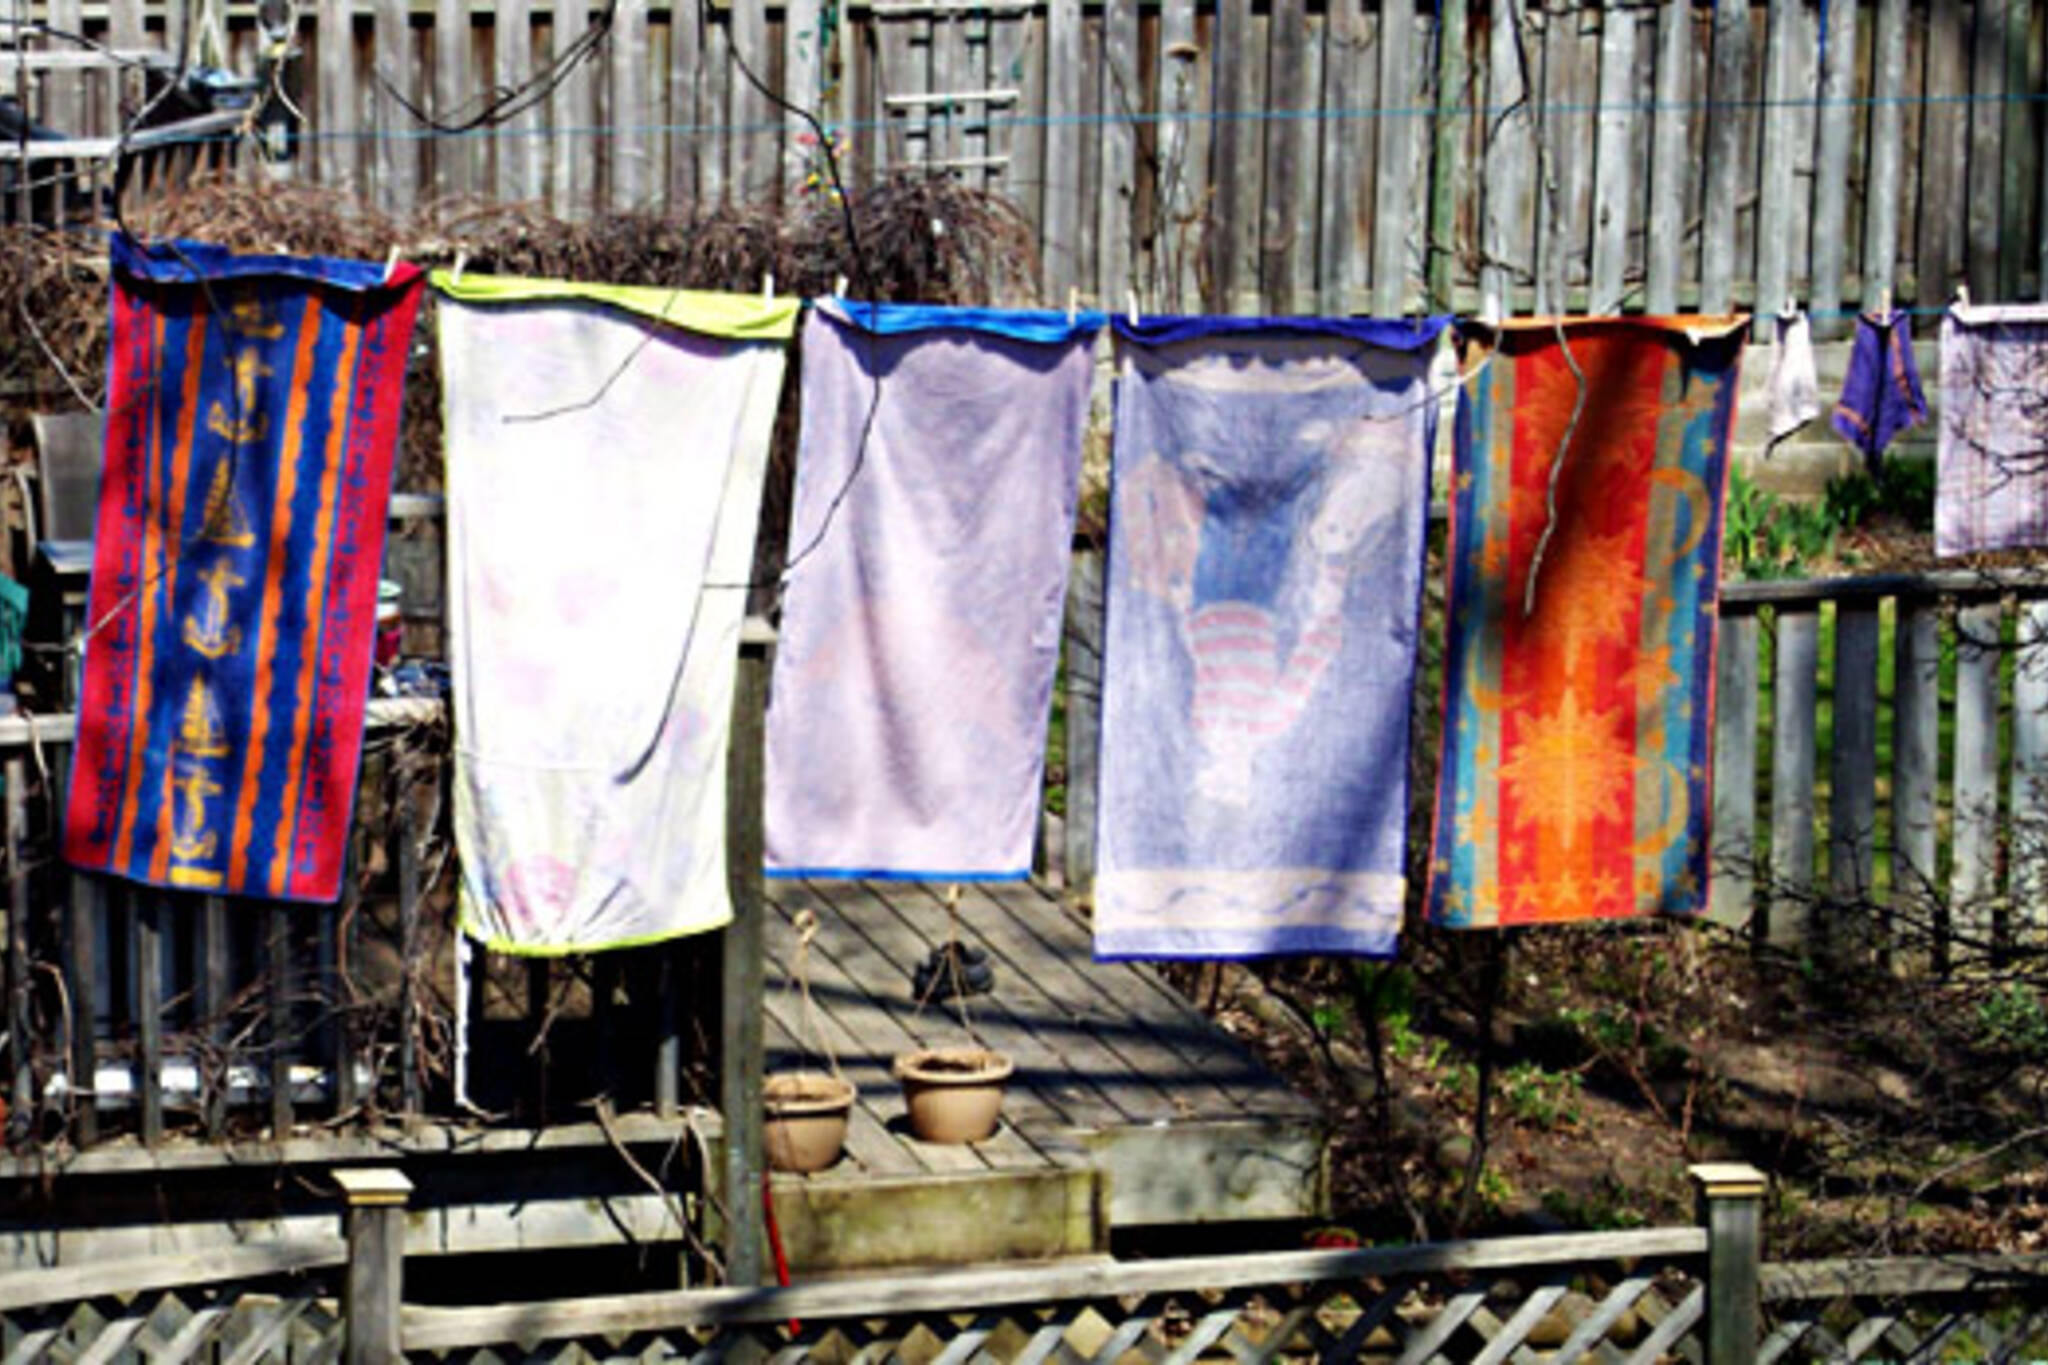 Clotheslines can no longer be banned in Ontario.